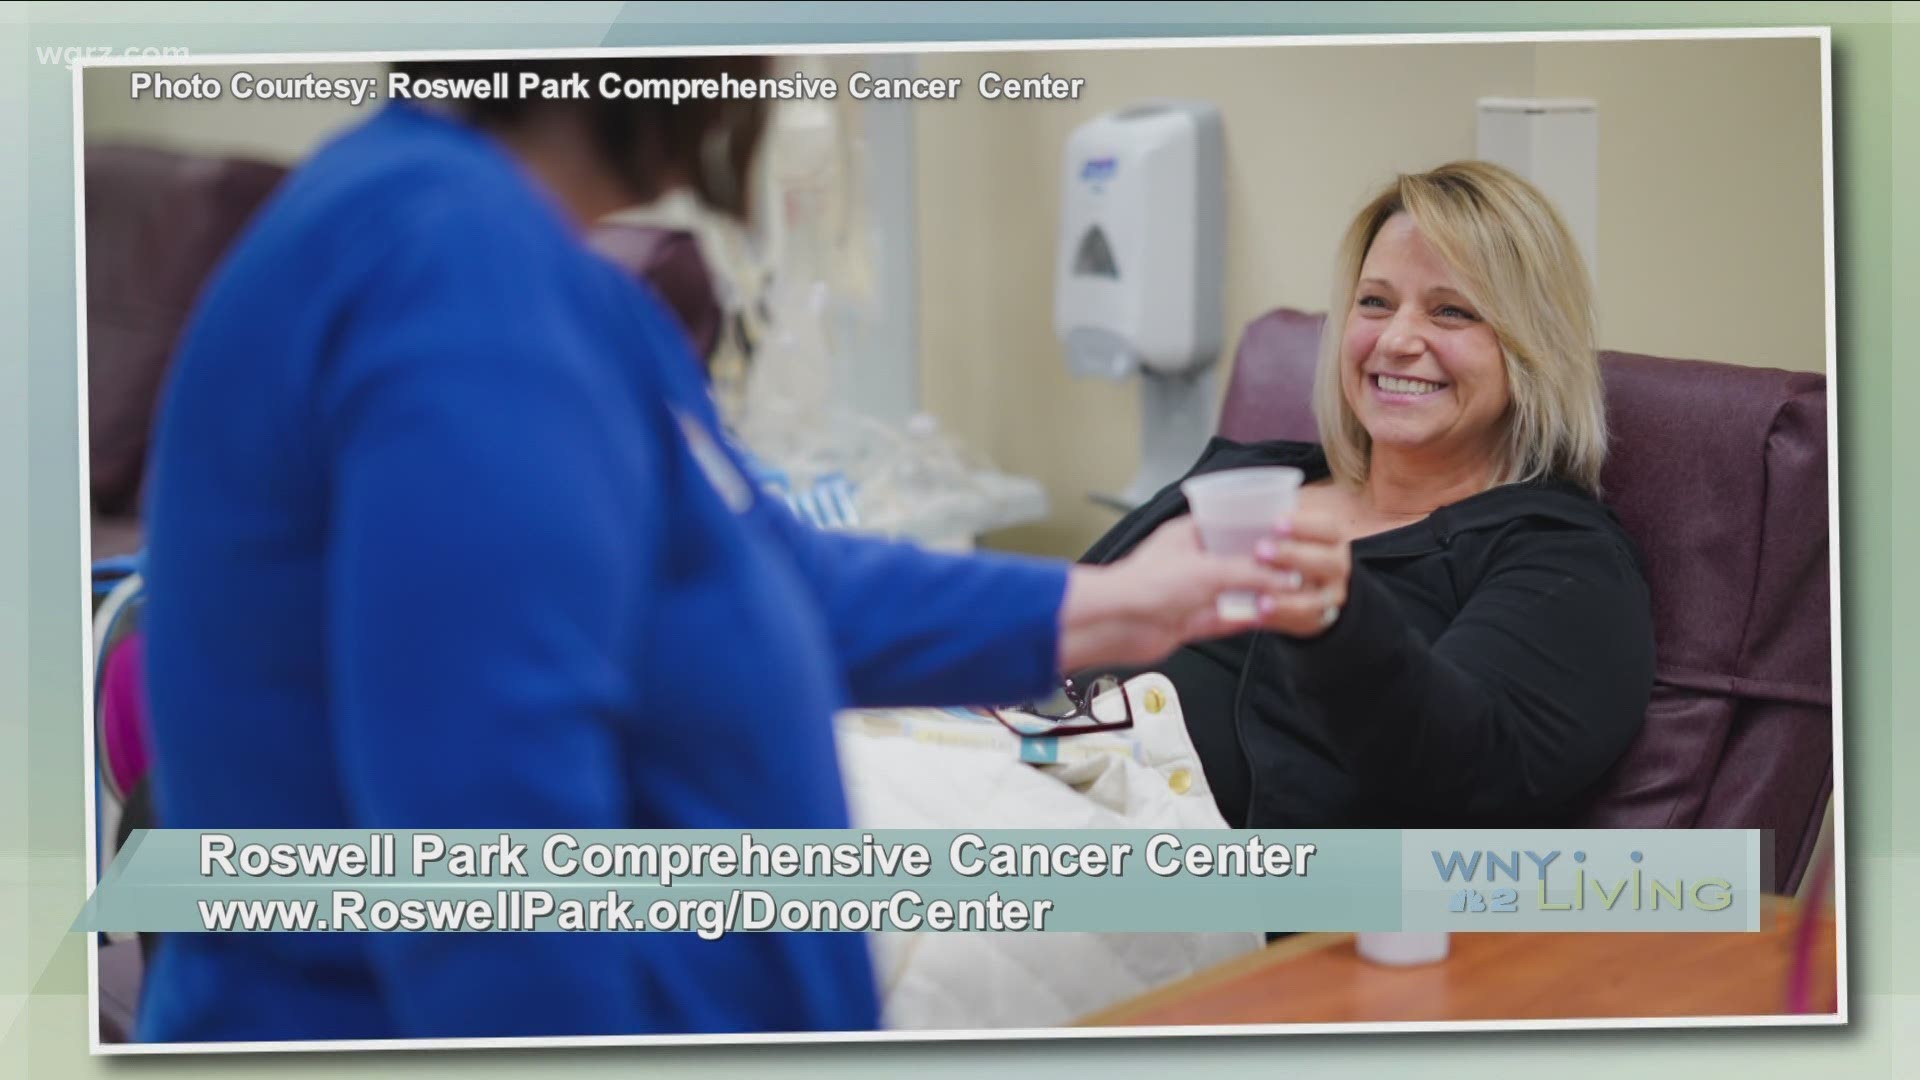 WNY Living - May 29 - Roswell Park Comprehensive Cancer Center (THIS VIDEO IS SPONSORED BY ROSWELL PARK COMPREHENSIVE CANCER CENTER)